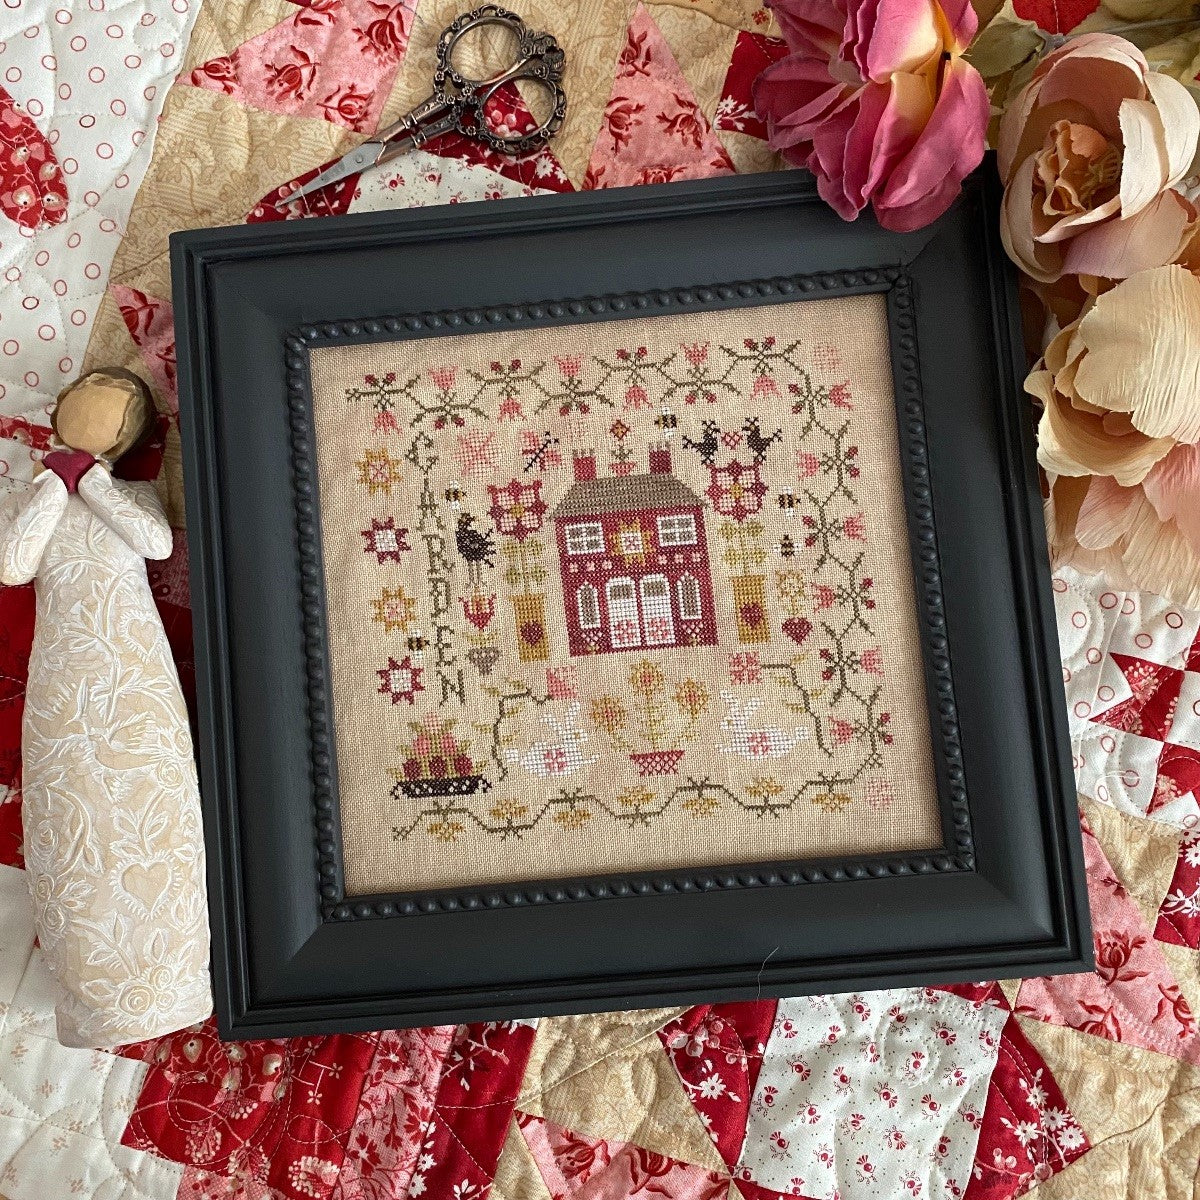 Summer Garden at Cranberry Manor - Cross Stitch Pattern by Pansy Patch